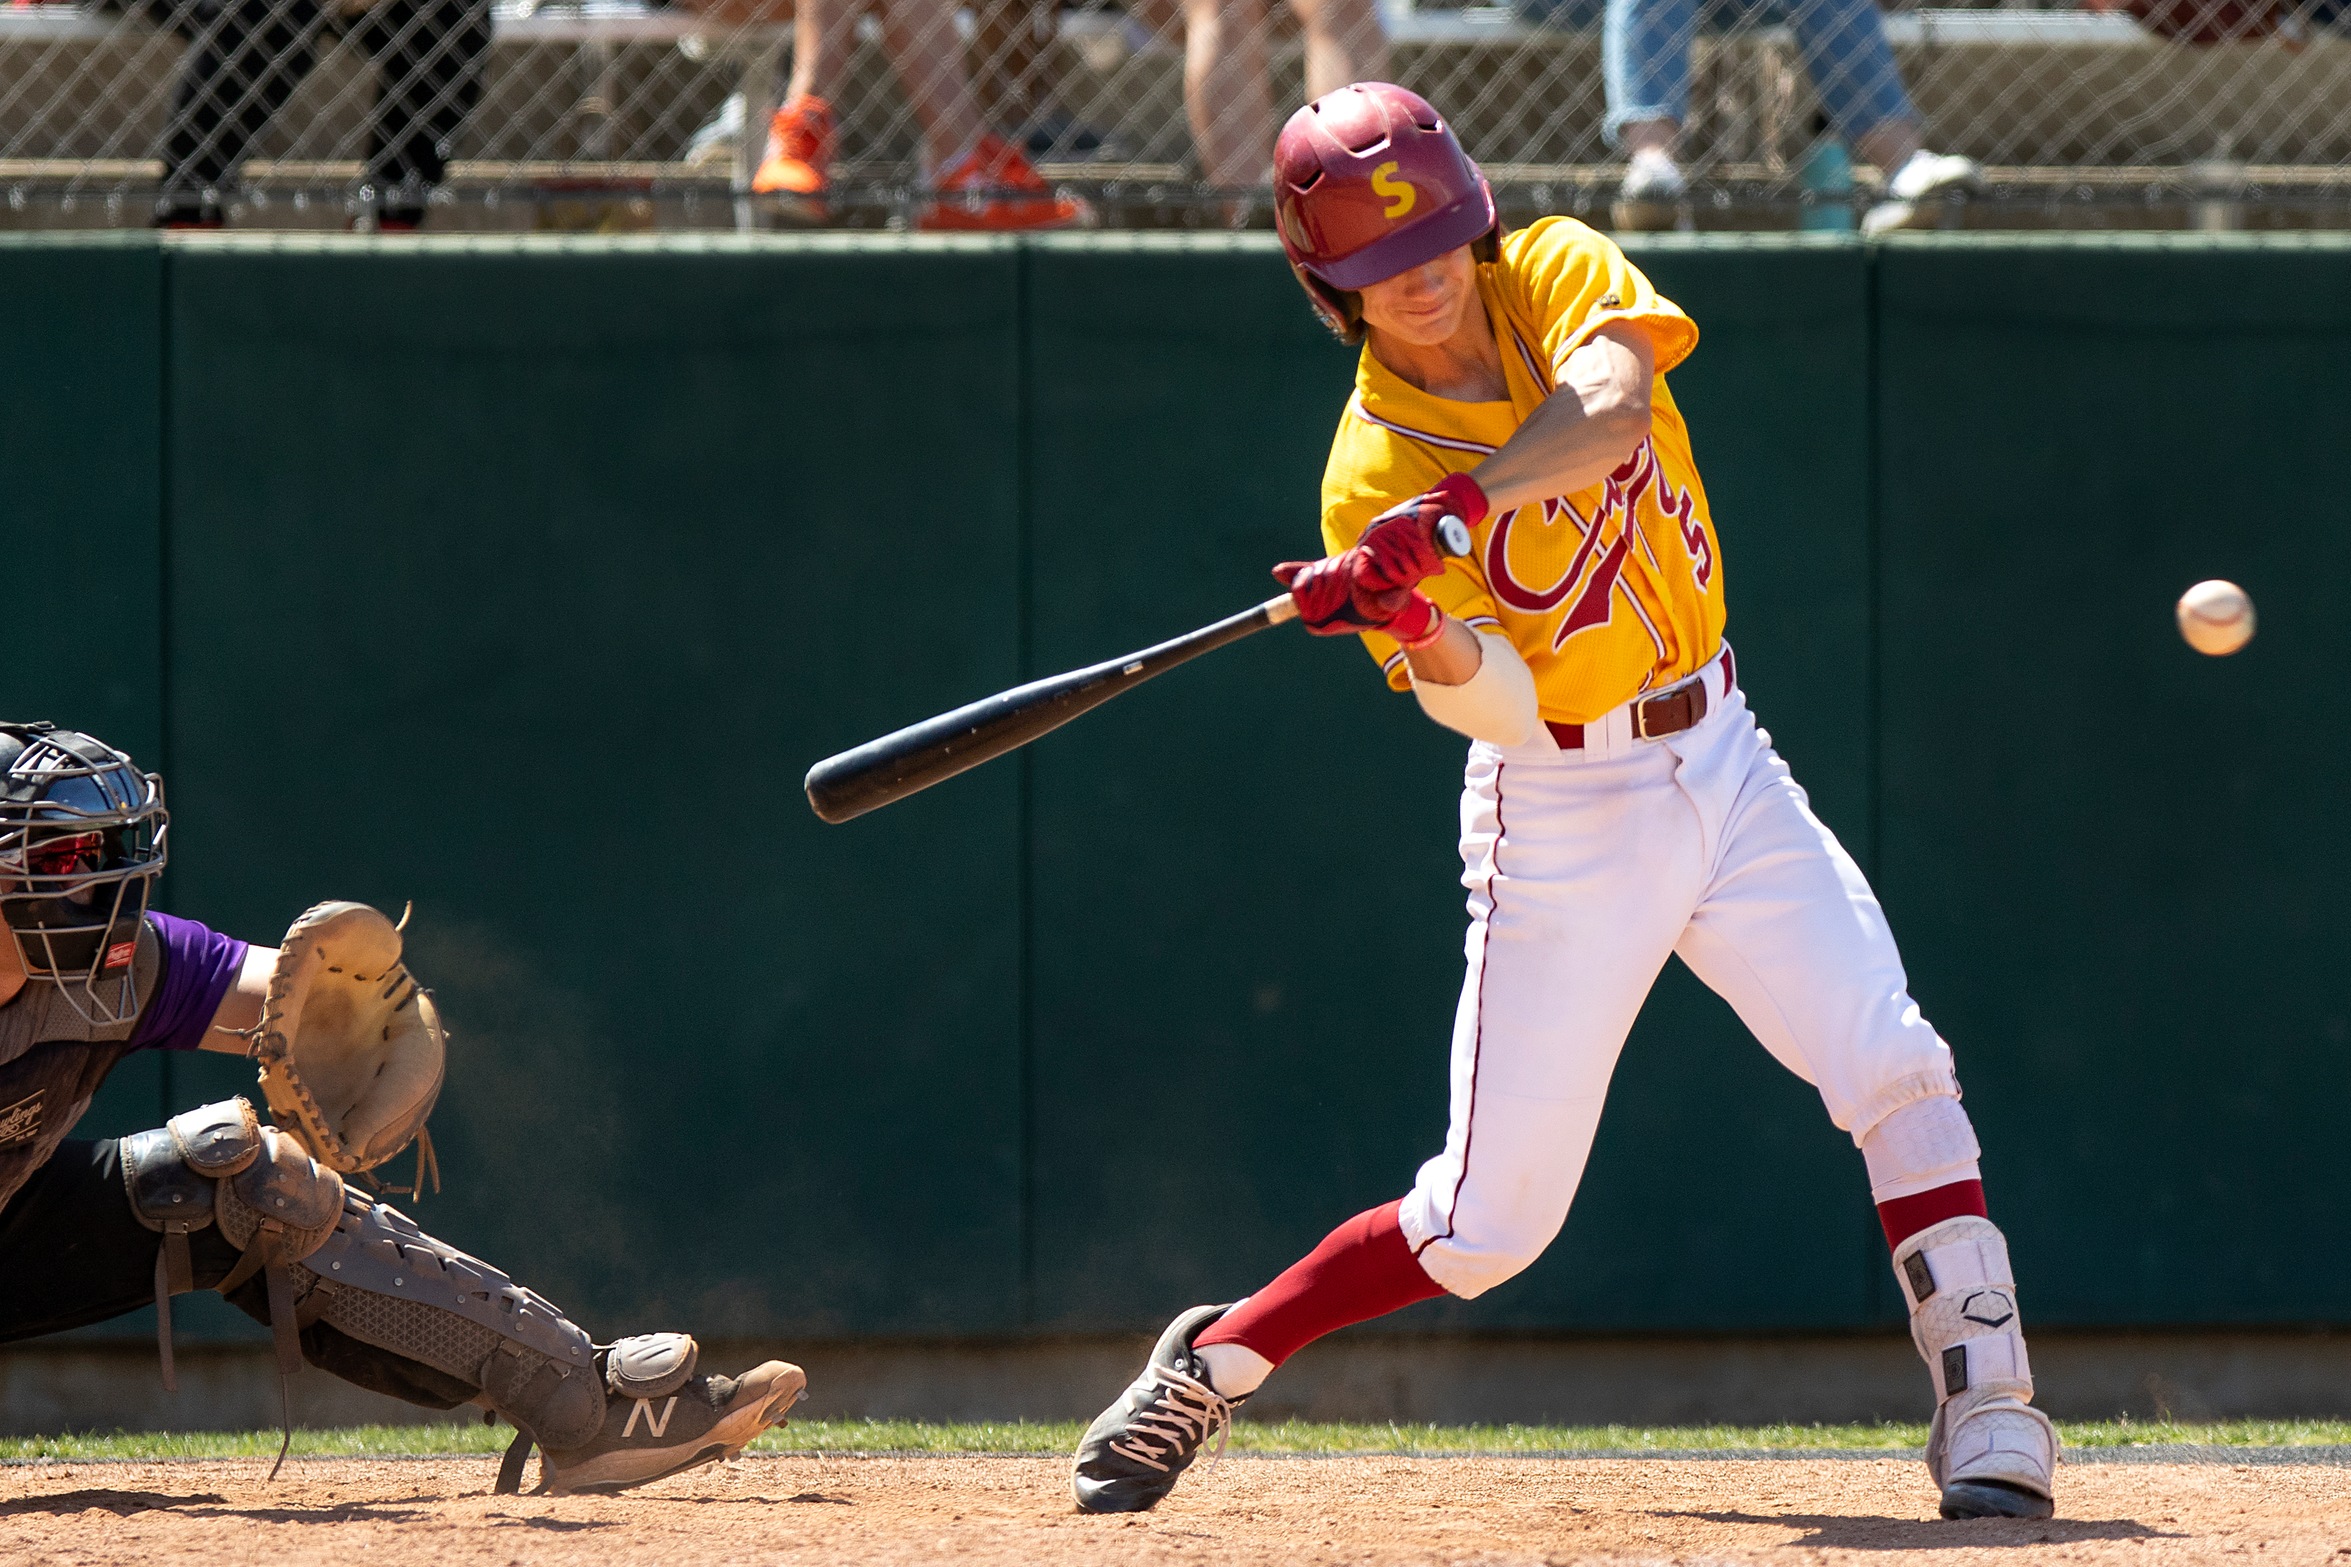 Cañada bounces back with a 13-5 win to even the season series; Foley homered for the Panthers